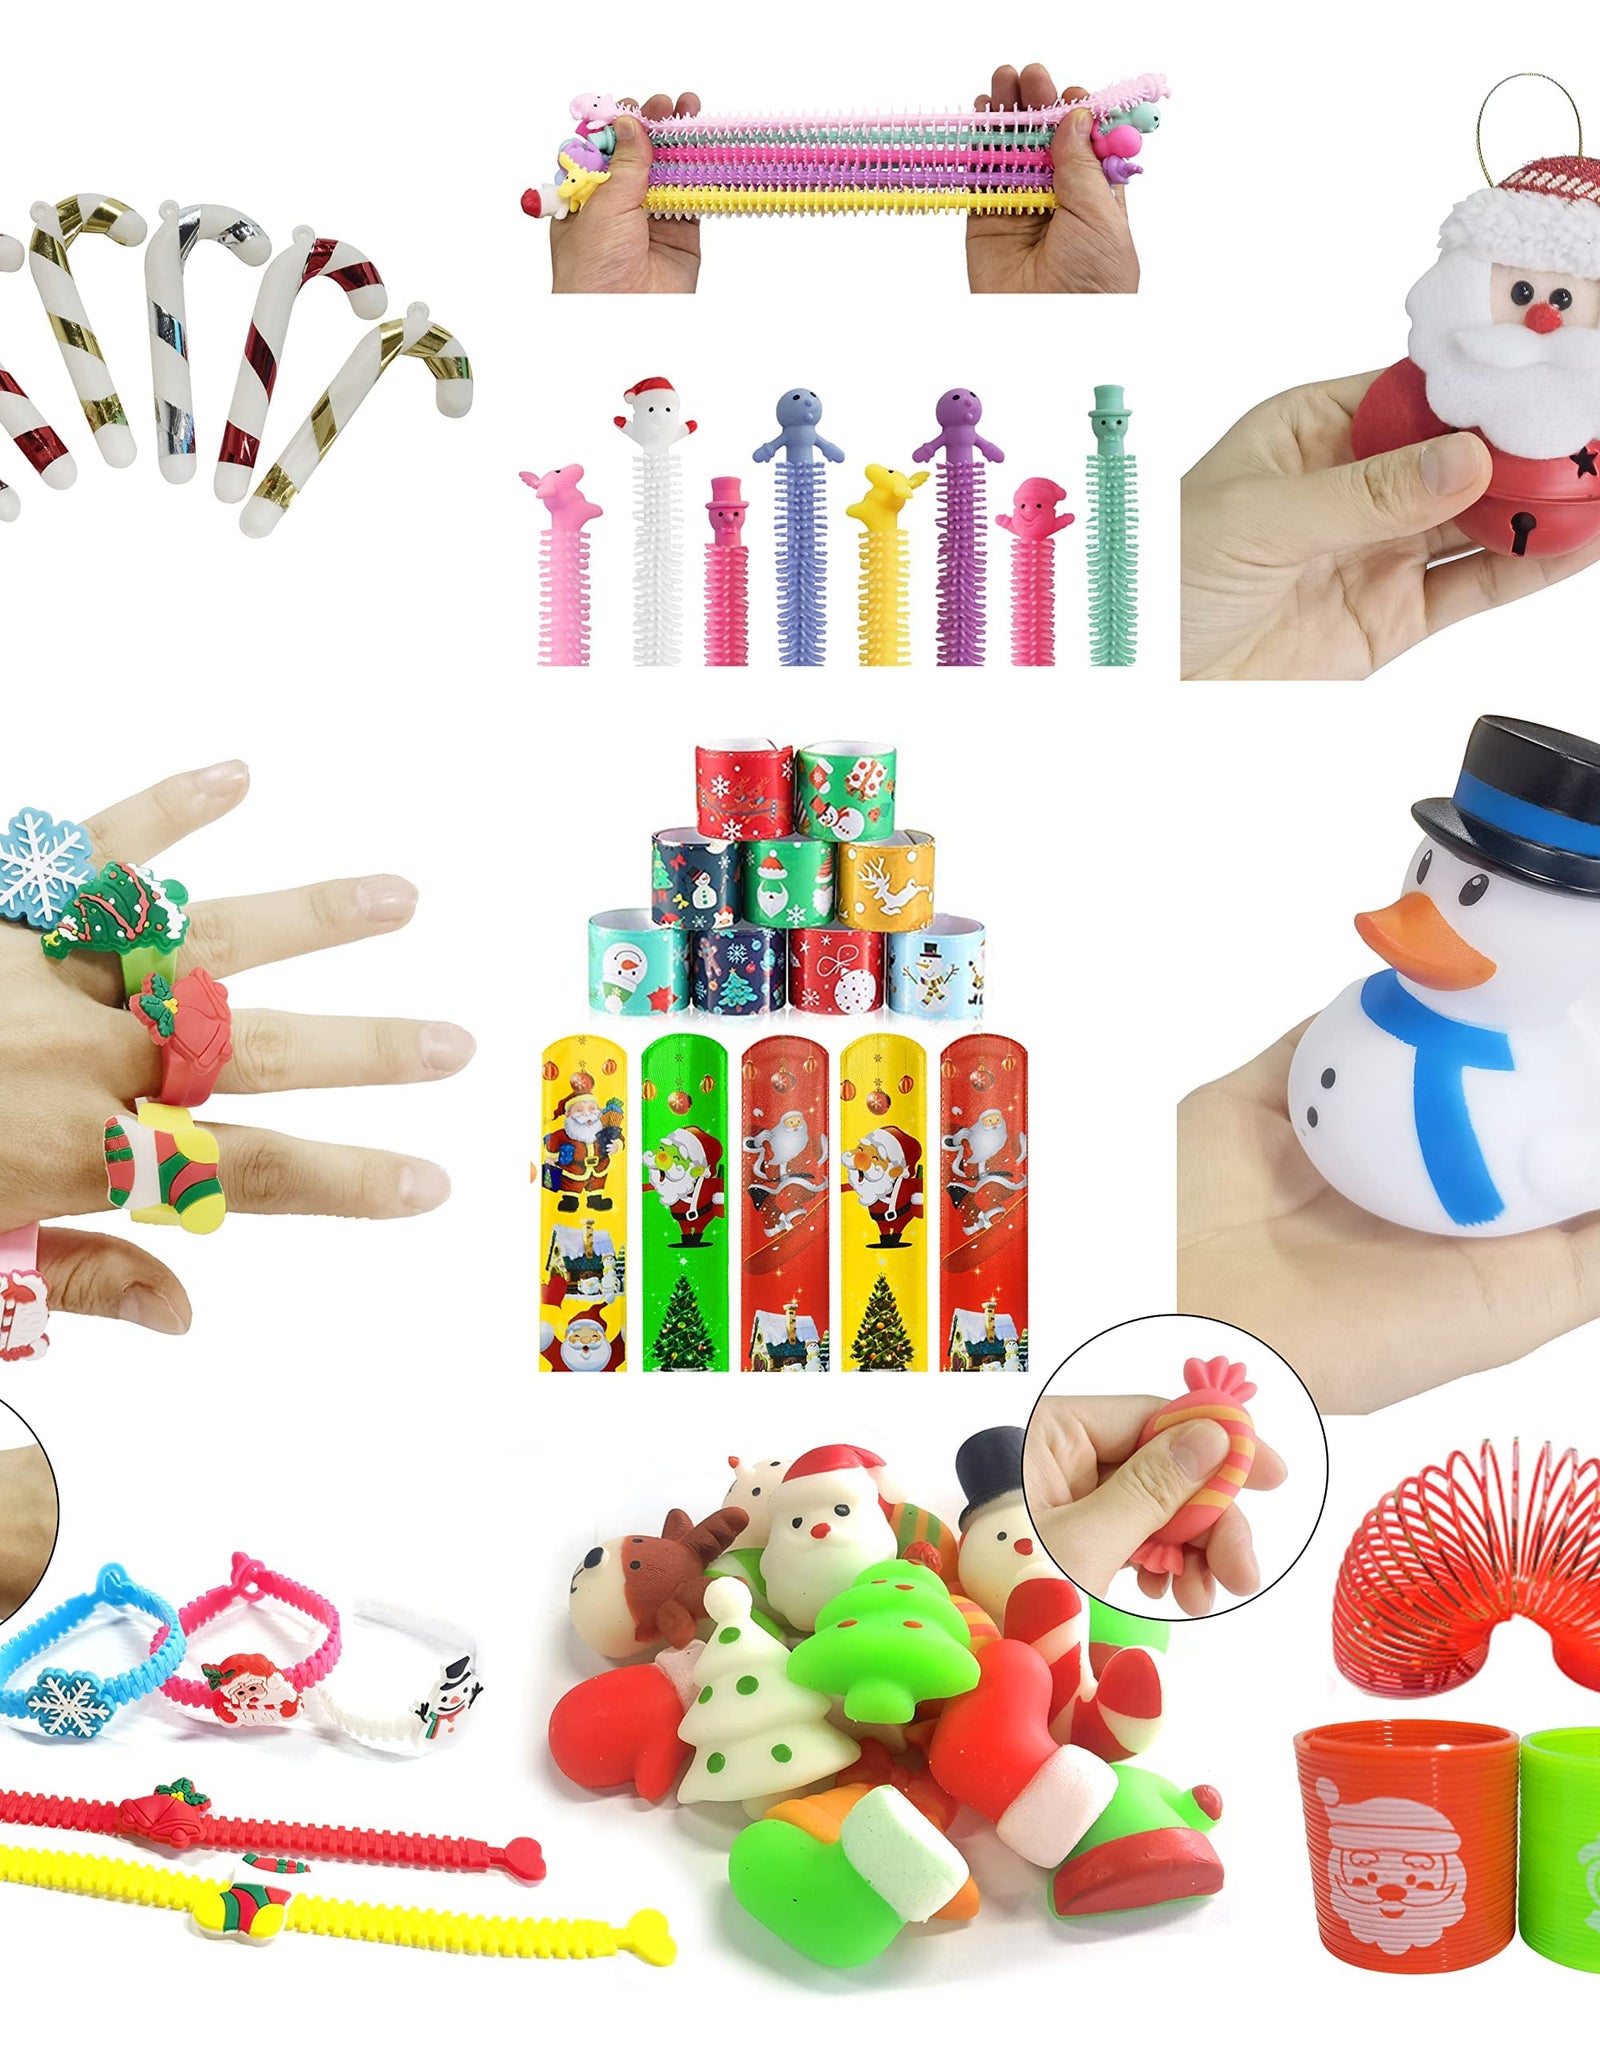 Christmas Pop Fidget Toy Packs Dimple Stress Relief Fidget Toys for Kids Party Favors Stocking Stuffers (Christmas-44)